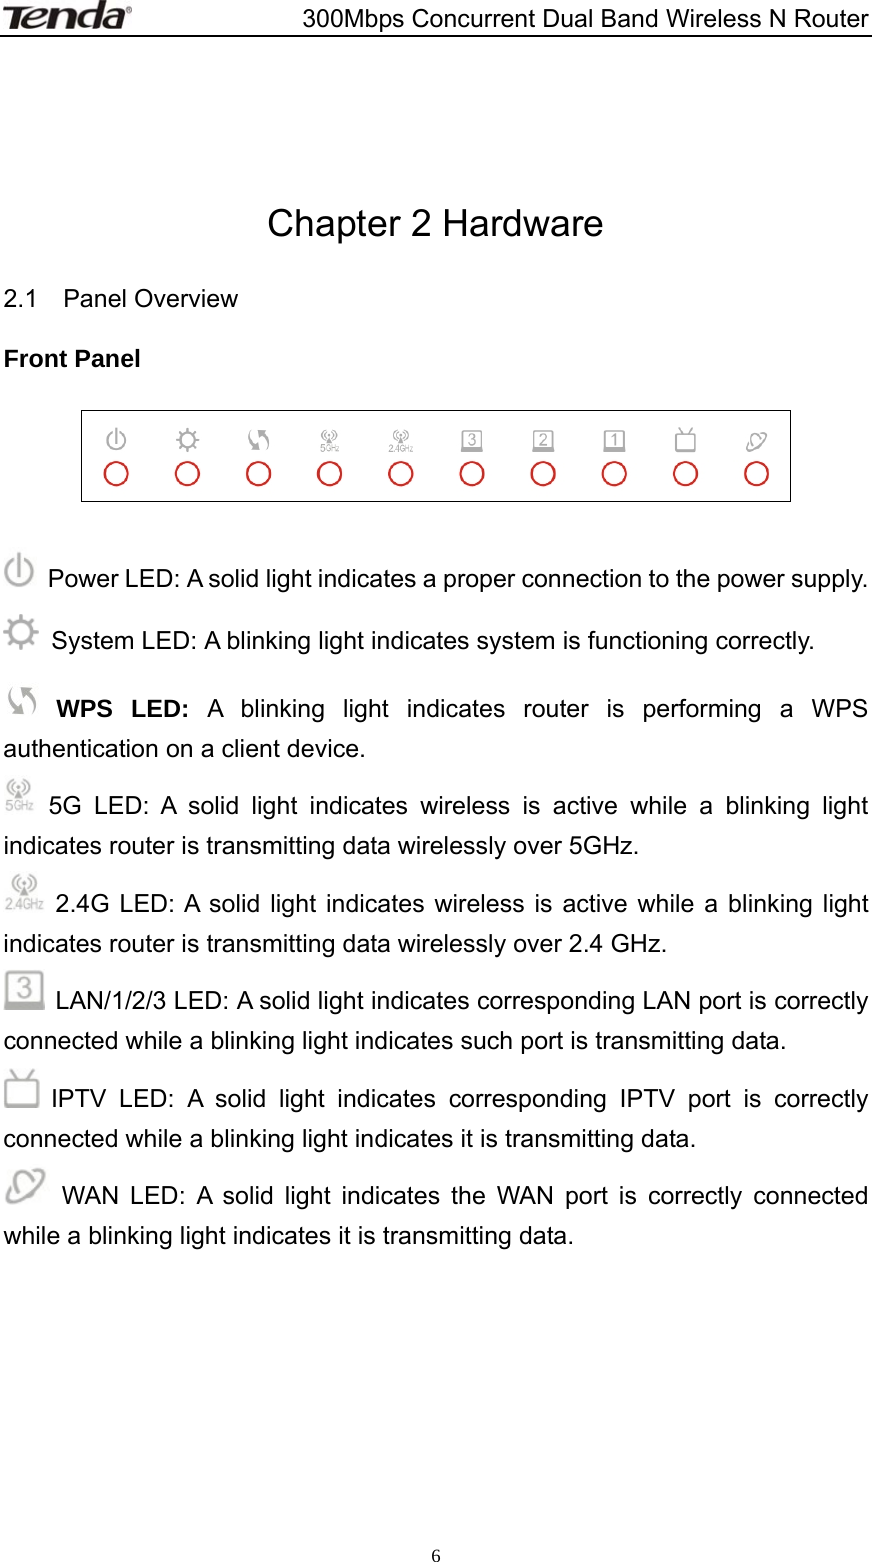                       300Mbps Concurrent Dual Band Wireless N Router  6   Chapter 2 Hardware 2.1  Panel Overview Front Panel     Power LED: A solid light indicates a proper connection to the power supply.  System LED: A blinking light indicates system is functioning correctly.  WPS LED: A blinking light indicates router is performing a WPS authentication on a client device.  5G LED: A solid light indicates wireless is active while a blinking light indicates router is transmitting data wirelessly over 5GHz.  2.4G LED: A solid light indicates wireless is active while a blinking light indicates router is transmitting data wirelessly over 2.4 GHz.  LAN/1/2/3 LED: A solid light indicates corresponding LAN port is correctly connected while a blinking light indicates such port is transmitting data.  IPTV LED: A solid light indicates corresponding IPTV port is correctly connected while a blinking light indicates it is transmitting data.  WAN LED: A solid light indicates the WAN port is correctly connected while a blinking light indicates it is transmitting data.         